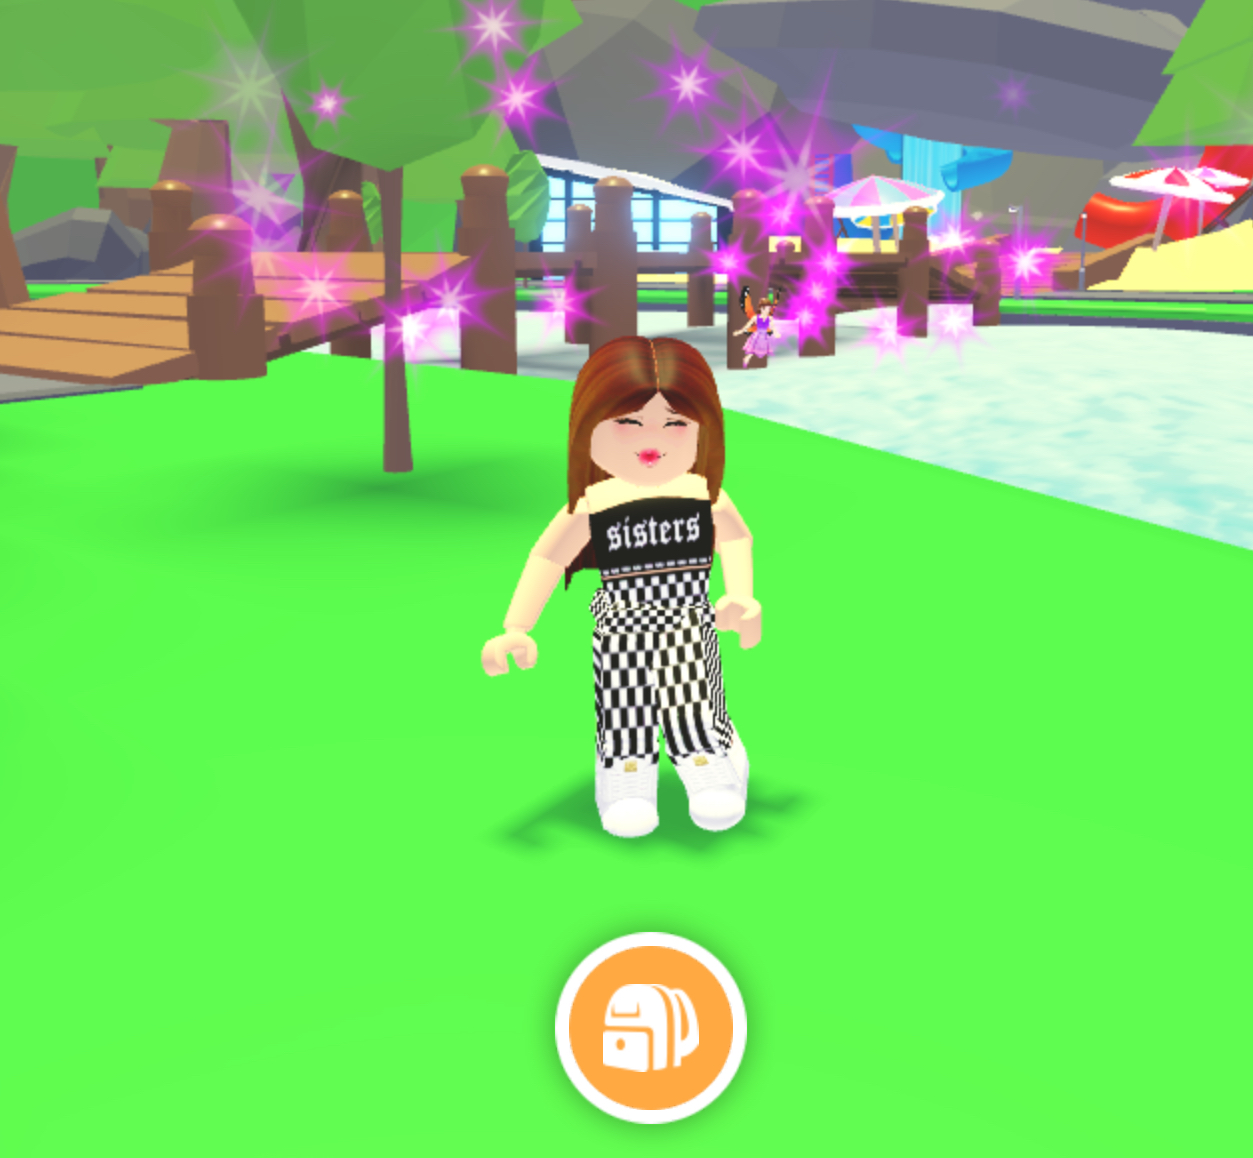 How To Dress Aesthetic In Adopt Me - aesthetic roblox adopt me outfits